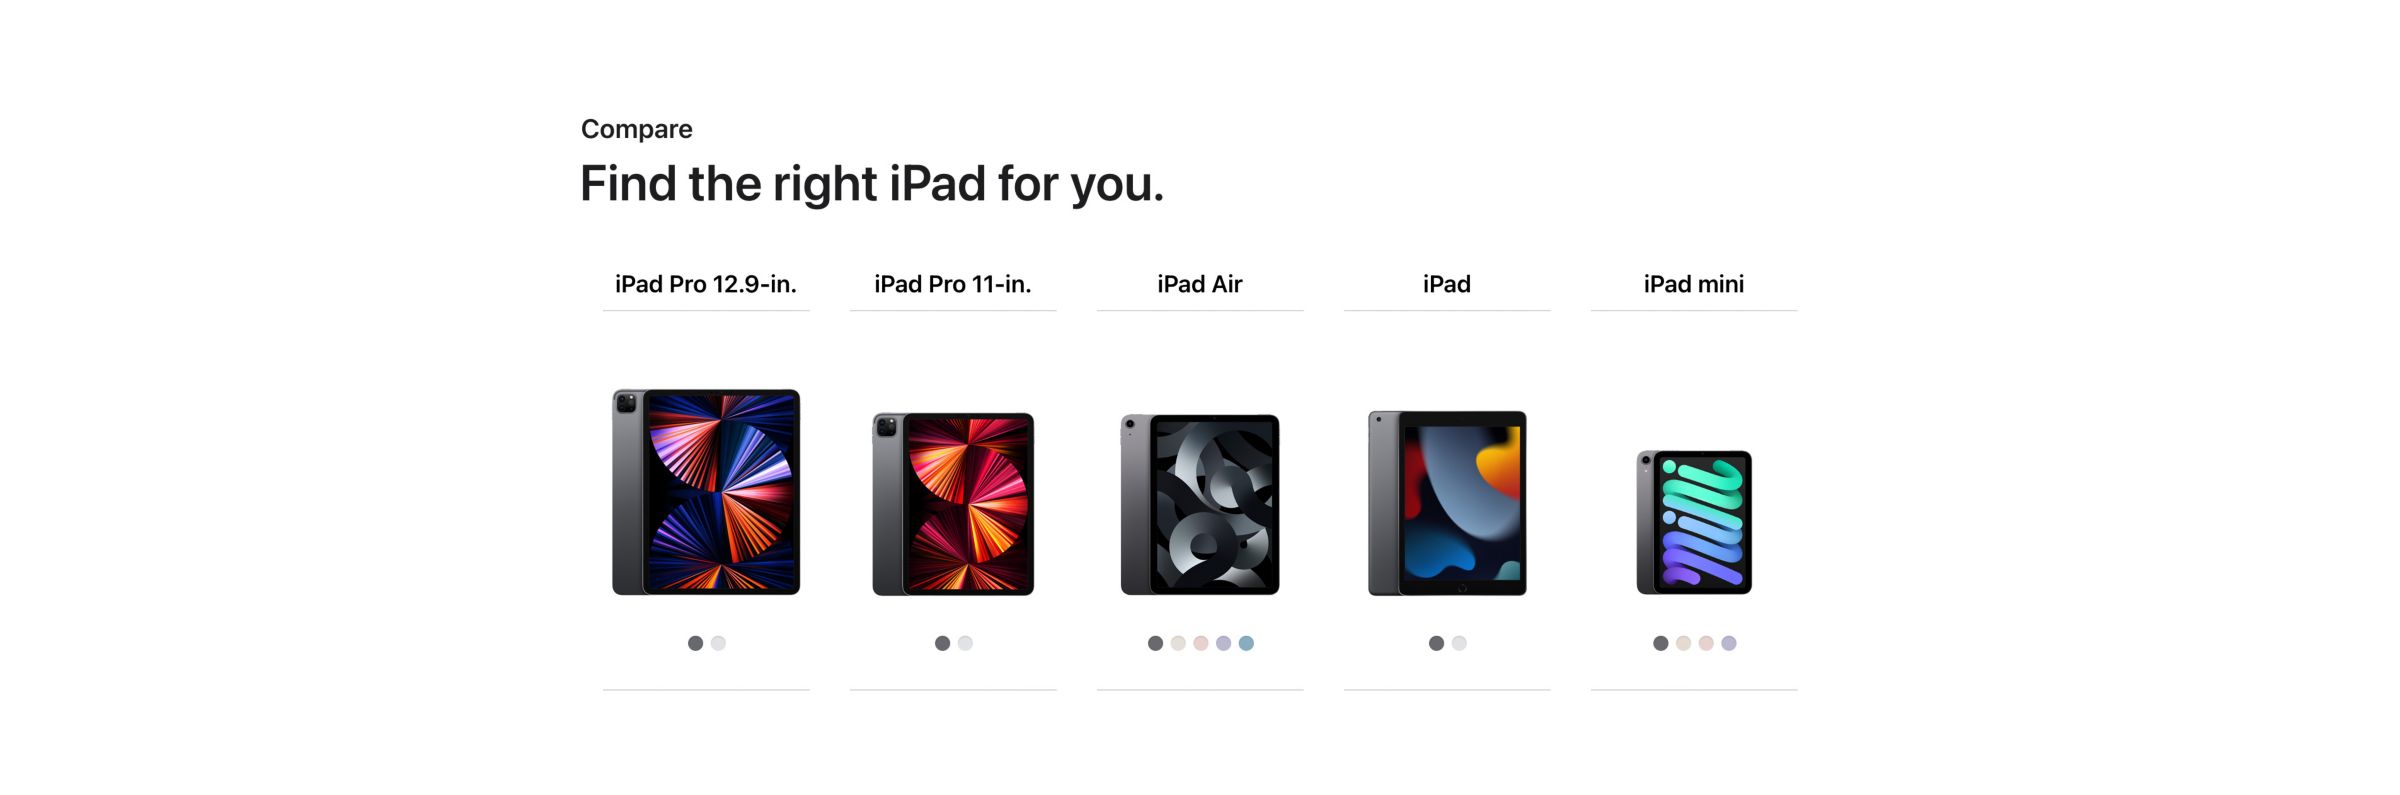 Compare Find the right iPad for you.